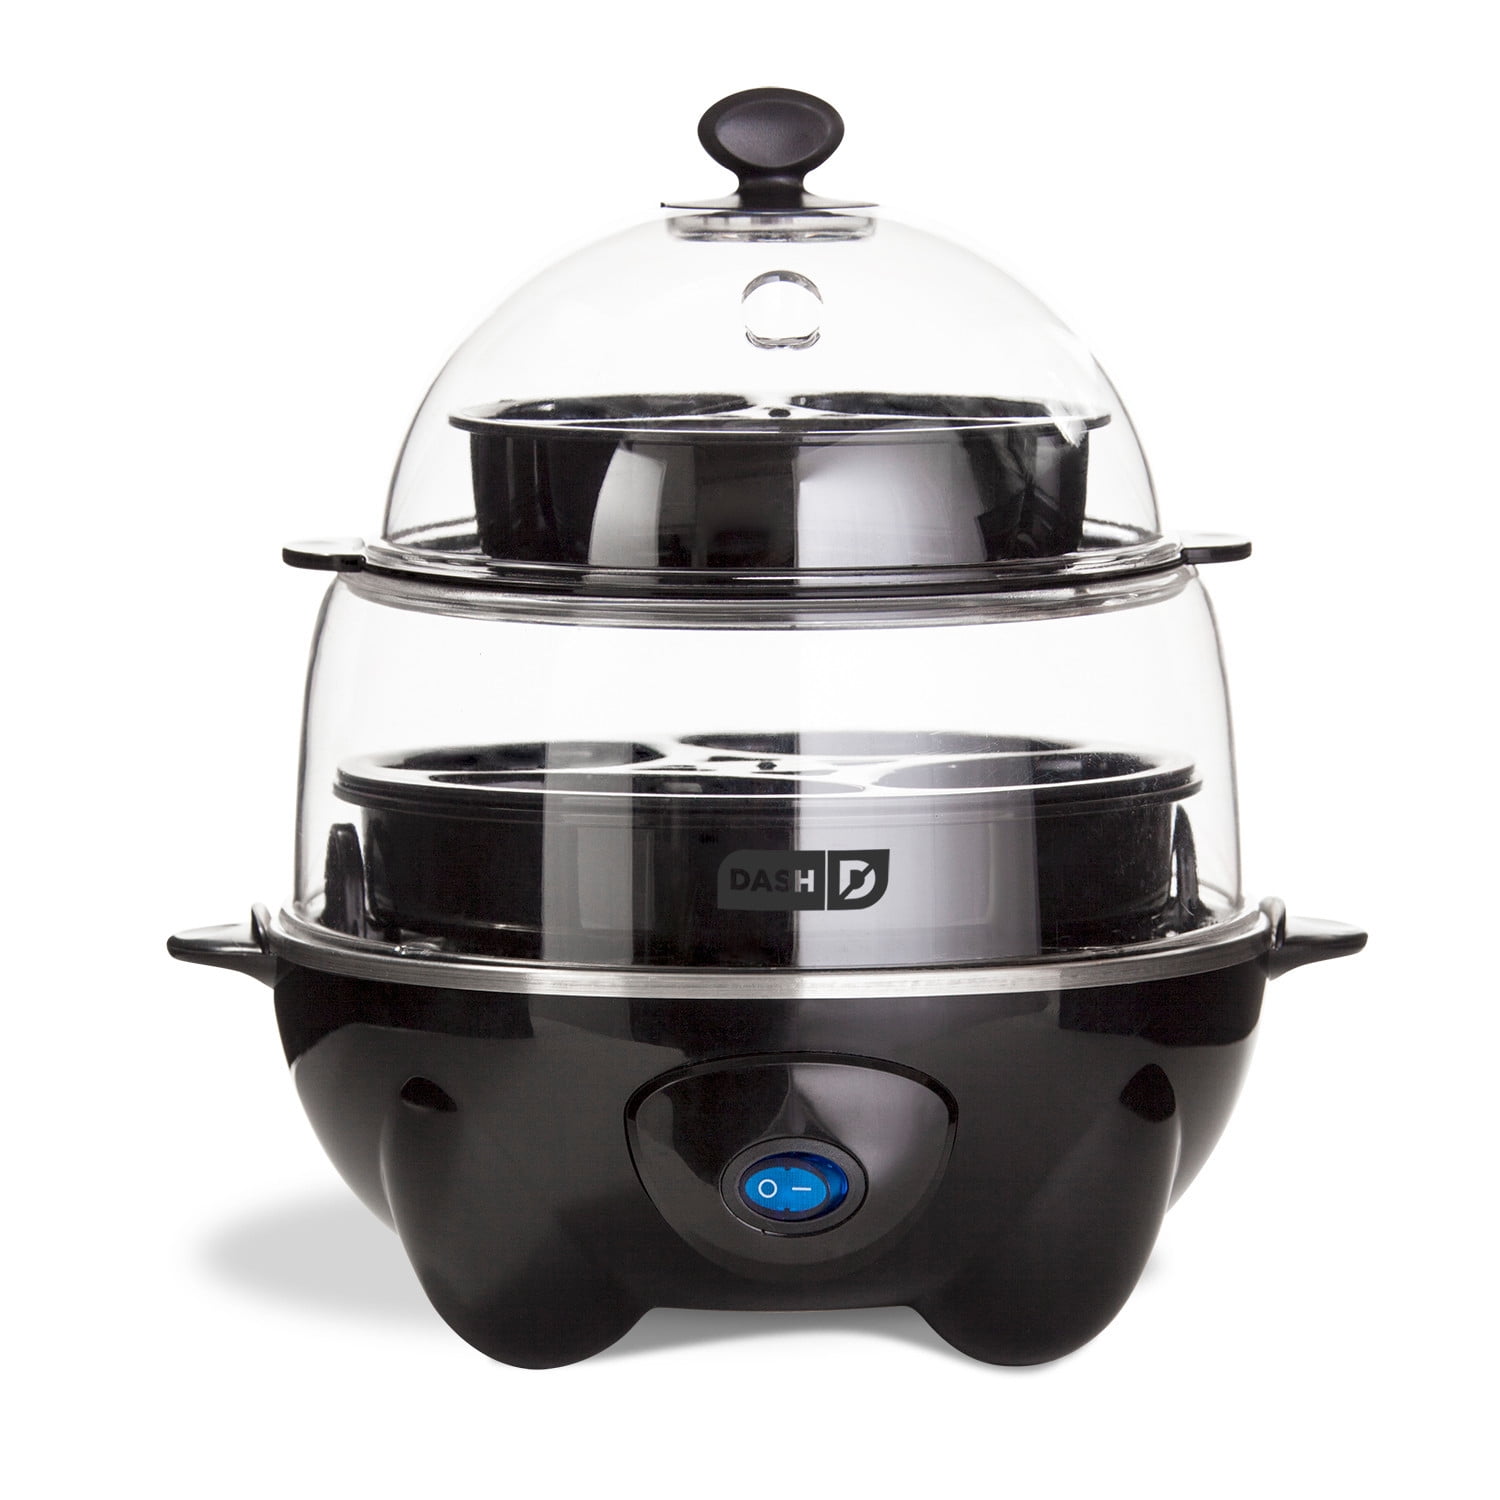 Dash Deluxe Egg Cooker - Shop Cookers & Roasters at H-E-B